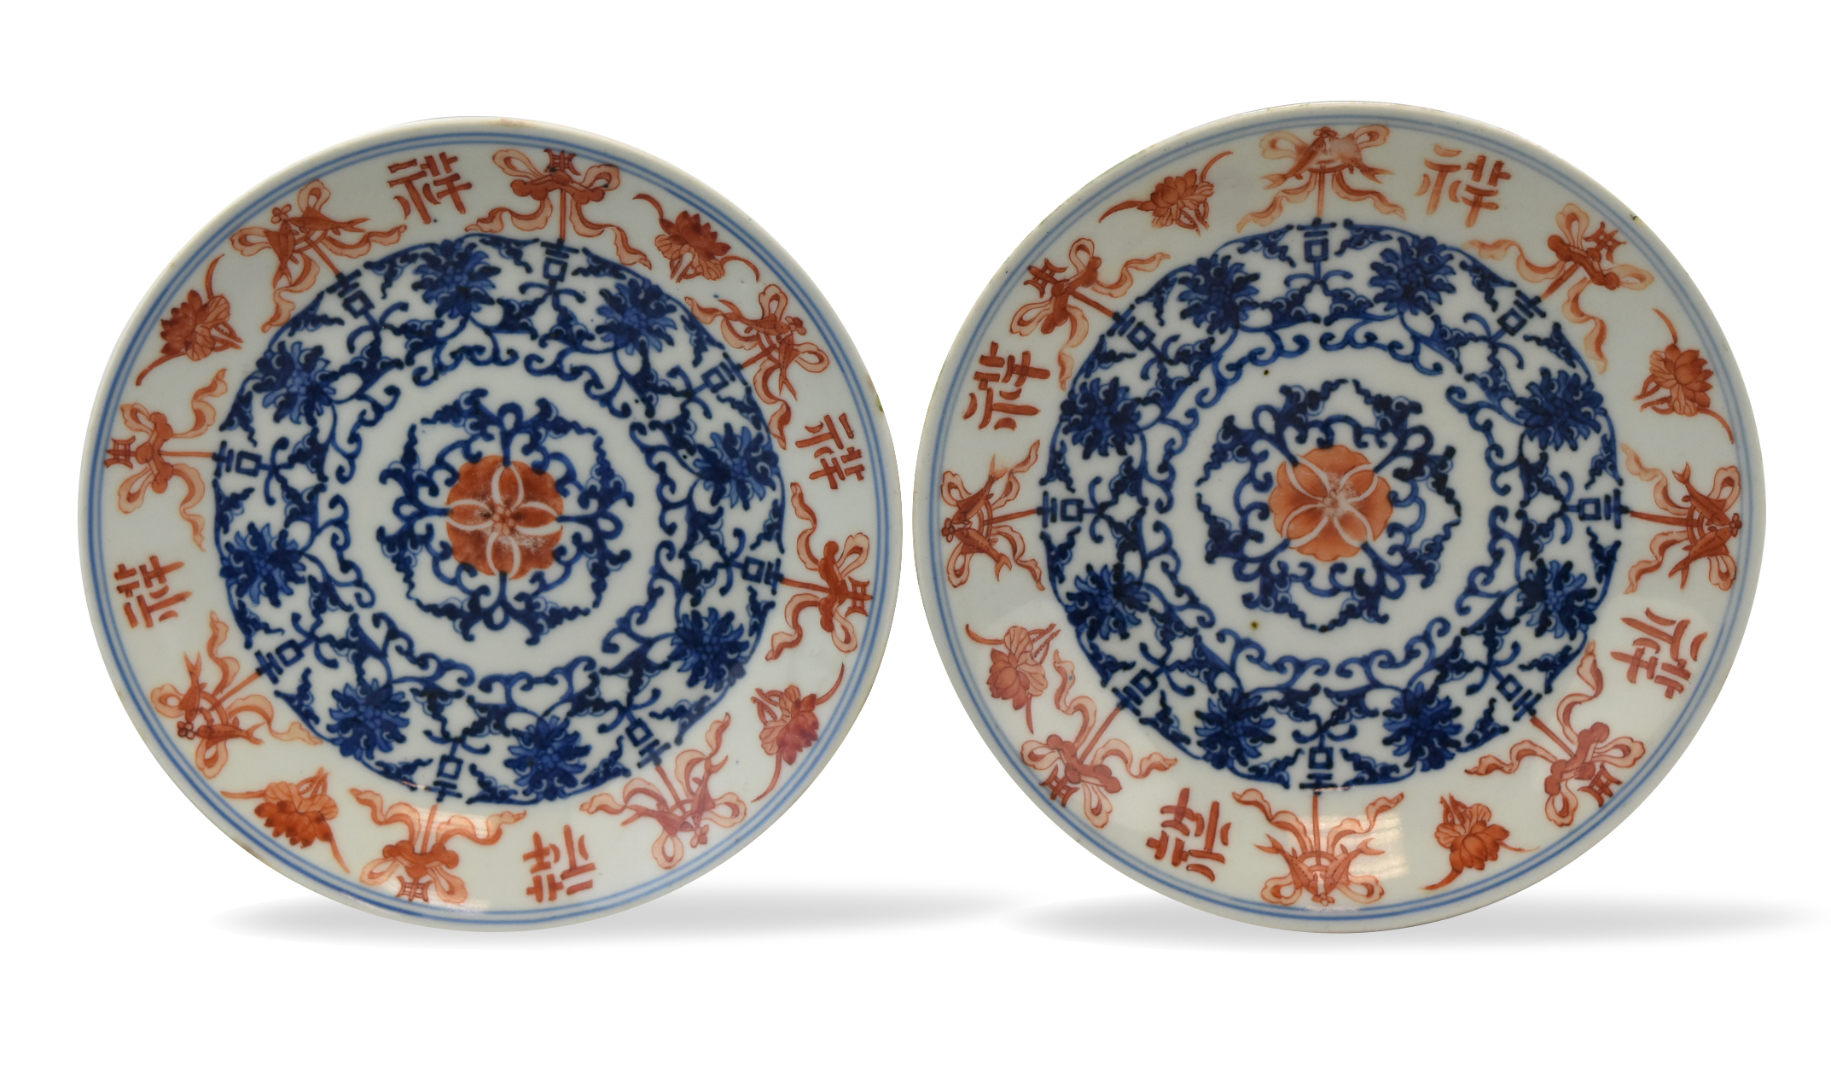 PAIR OF CHINESE BLUE & IRON RED